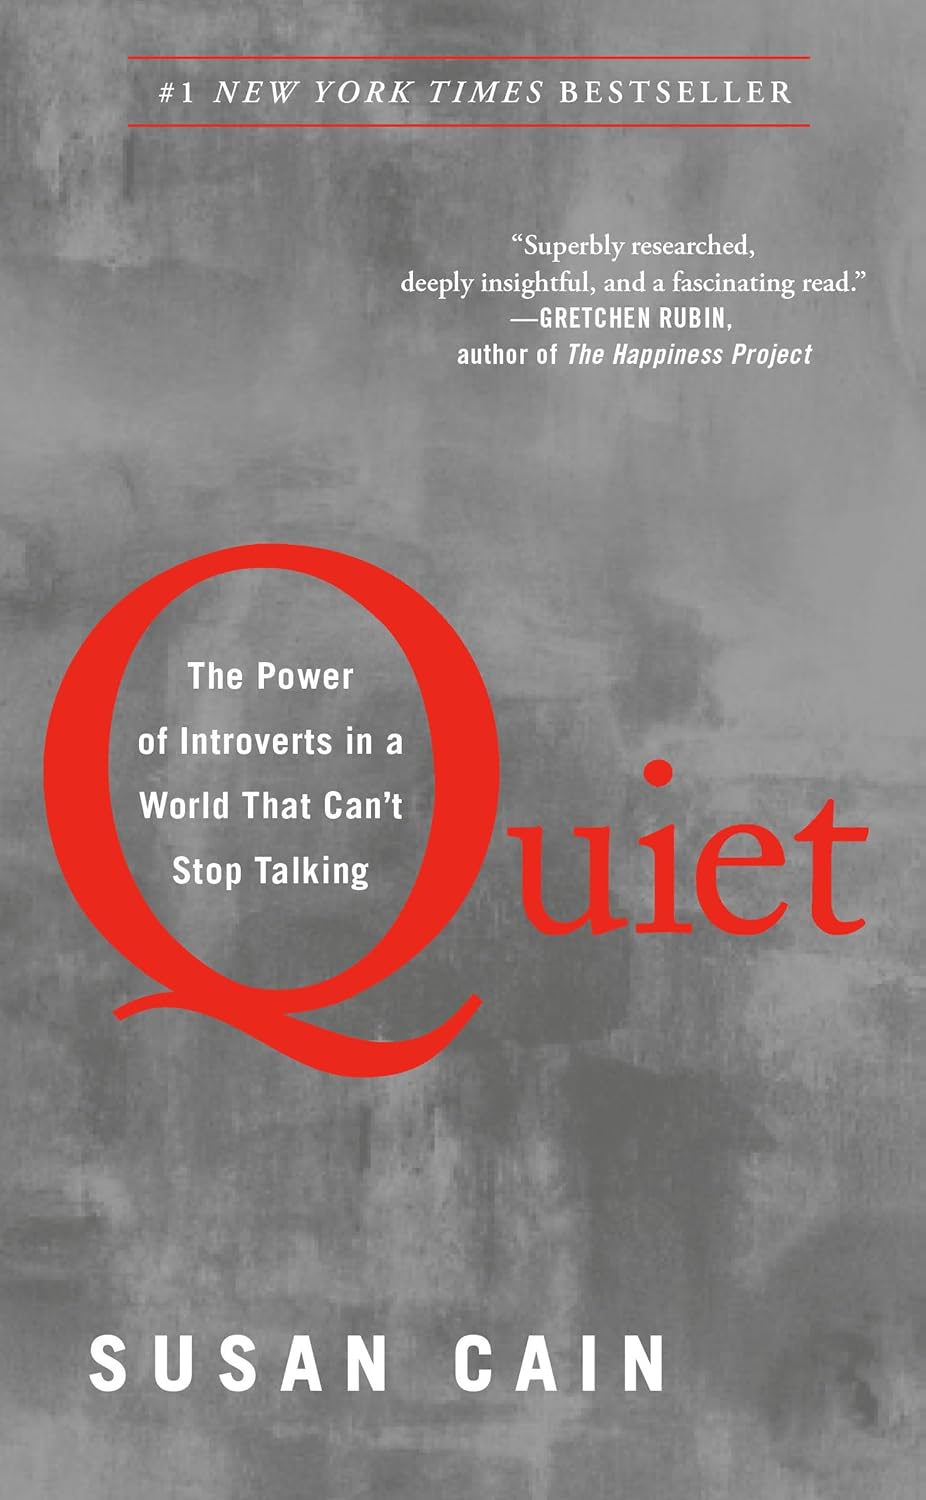 Quiet by Susan Cain - Motivational Books for the New Year